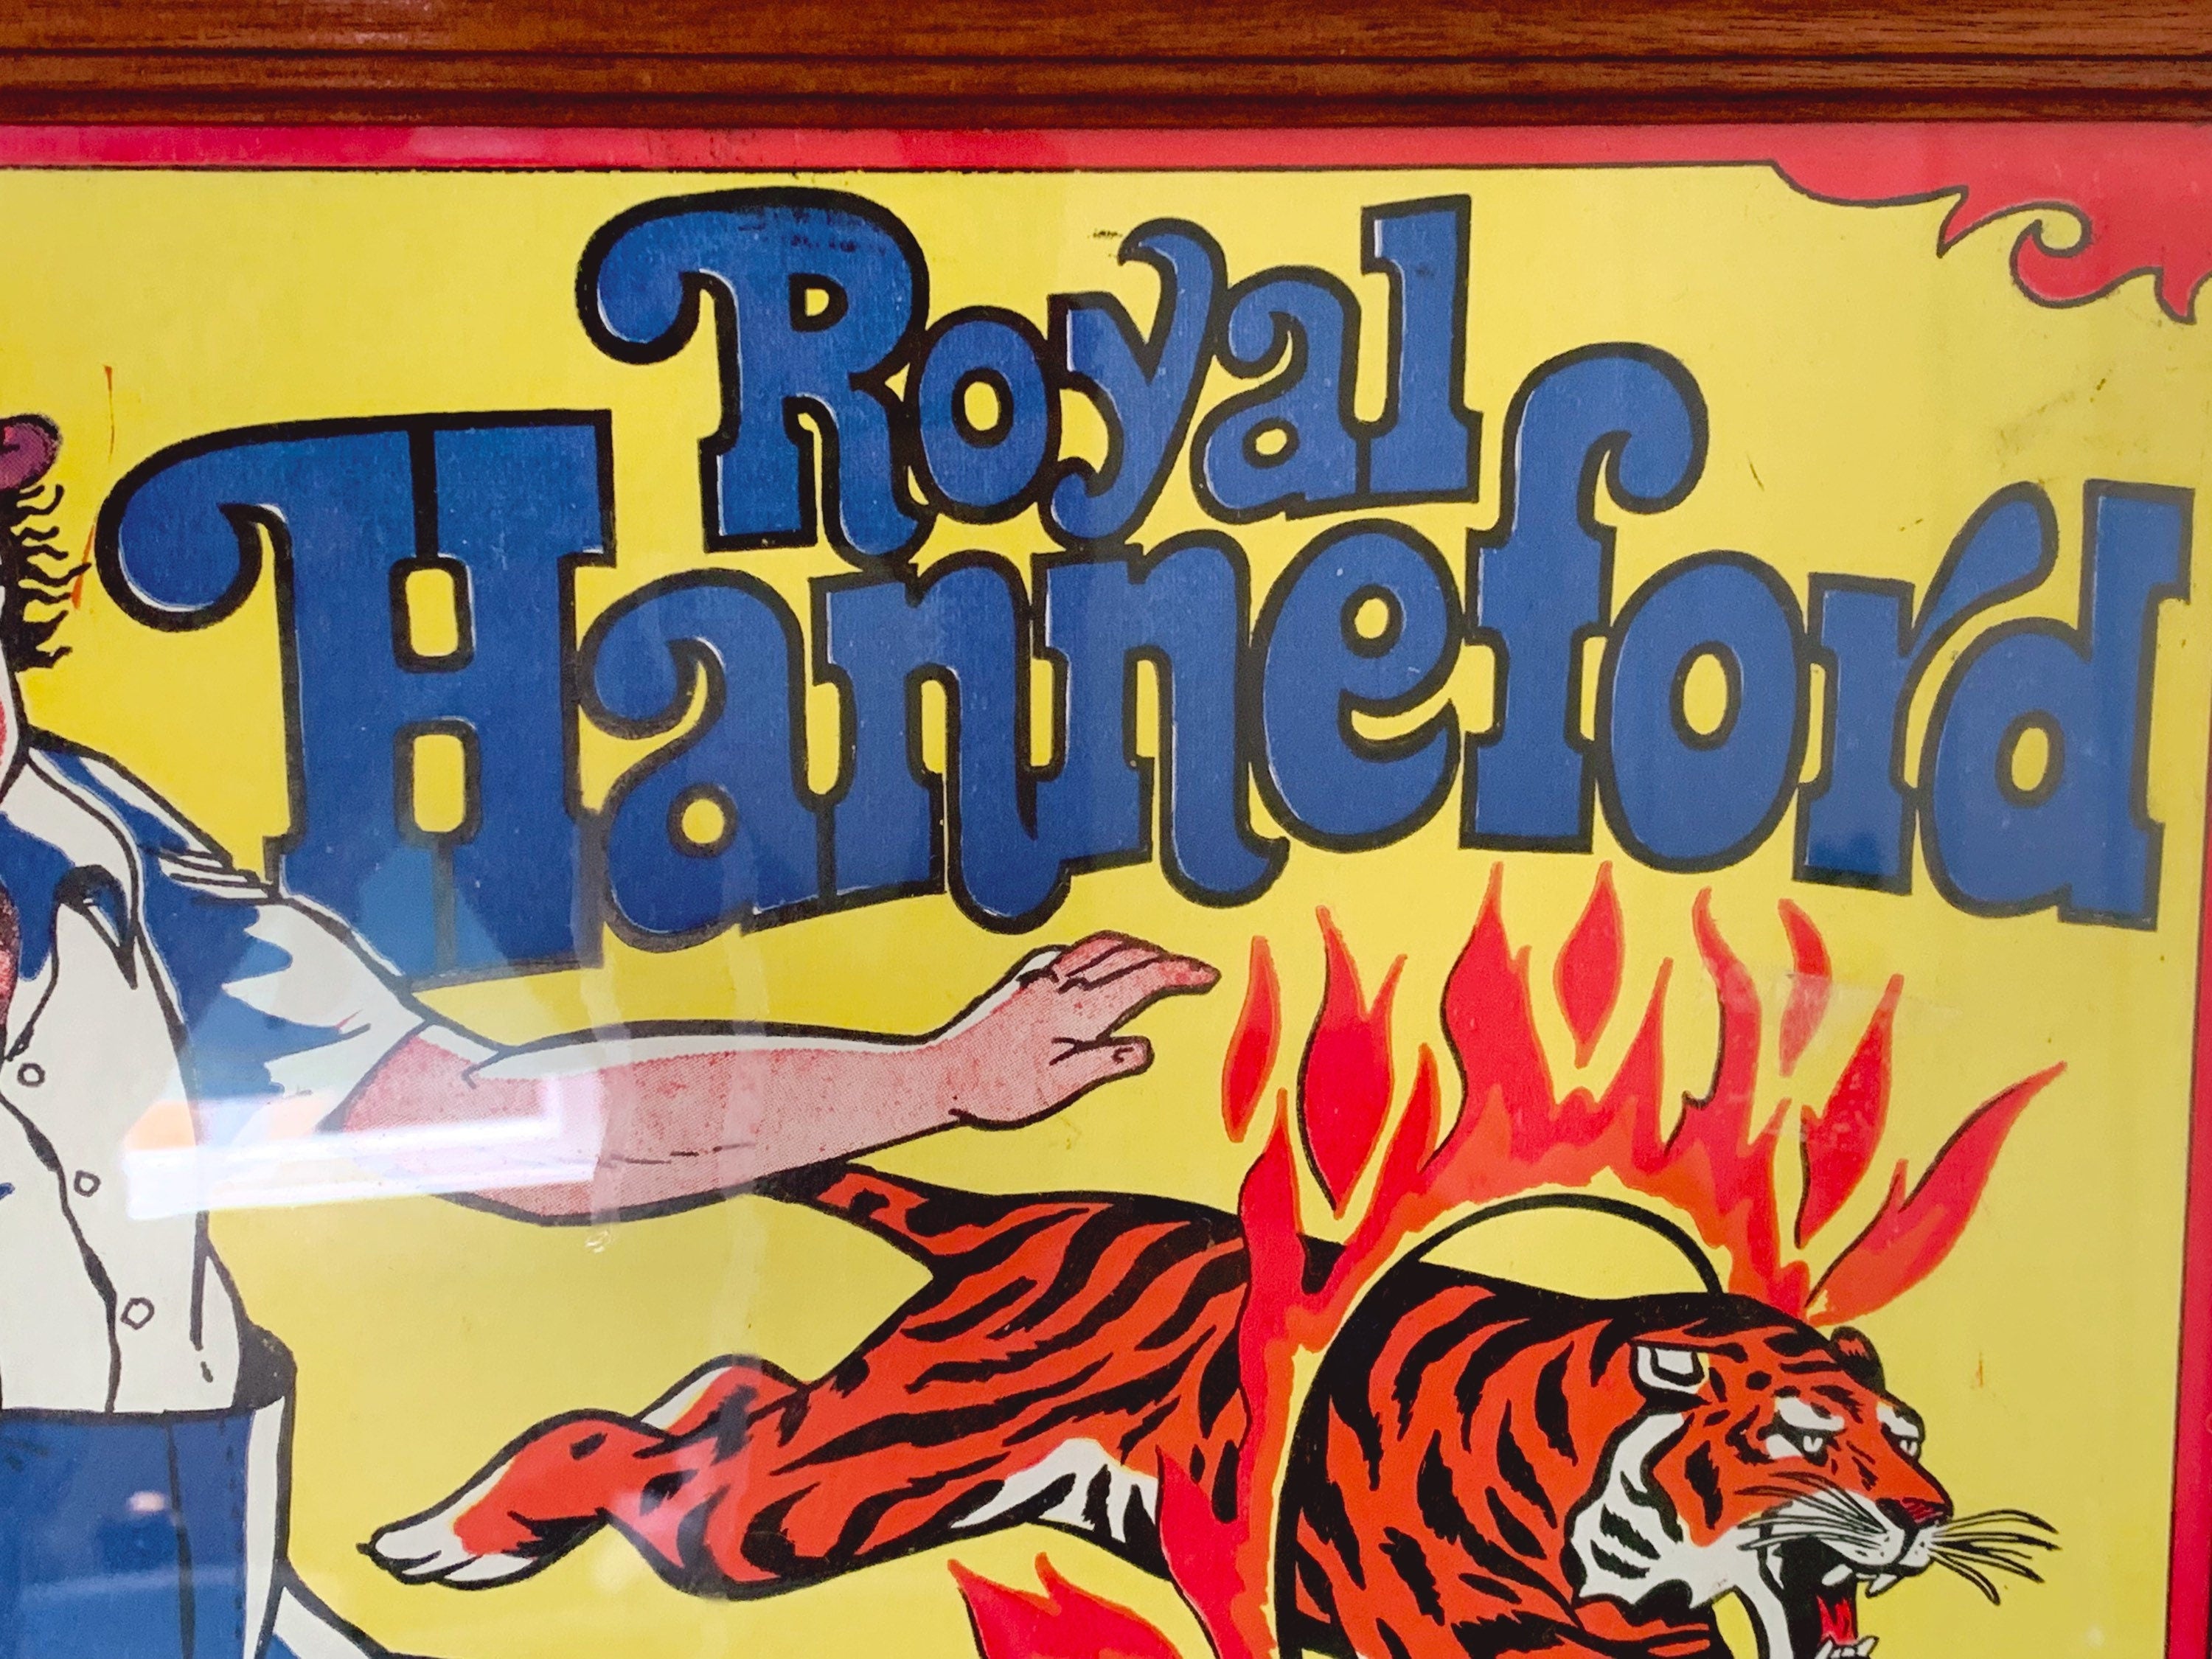 Vintage Royal Hanneford Circus Poster in Wood Frame | Ray Dirgo Circus Art Collectible Advertisement | Gallery Wall Art | Kids Room Decor